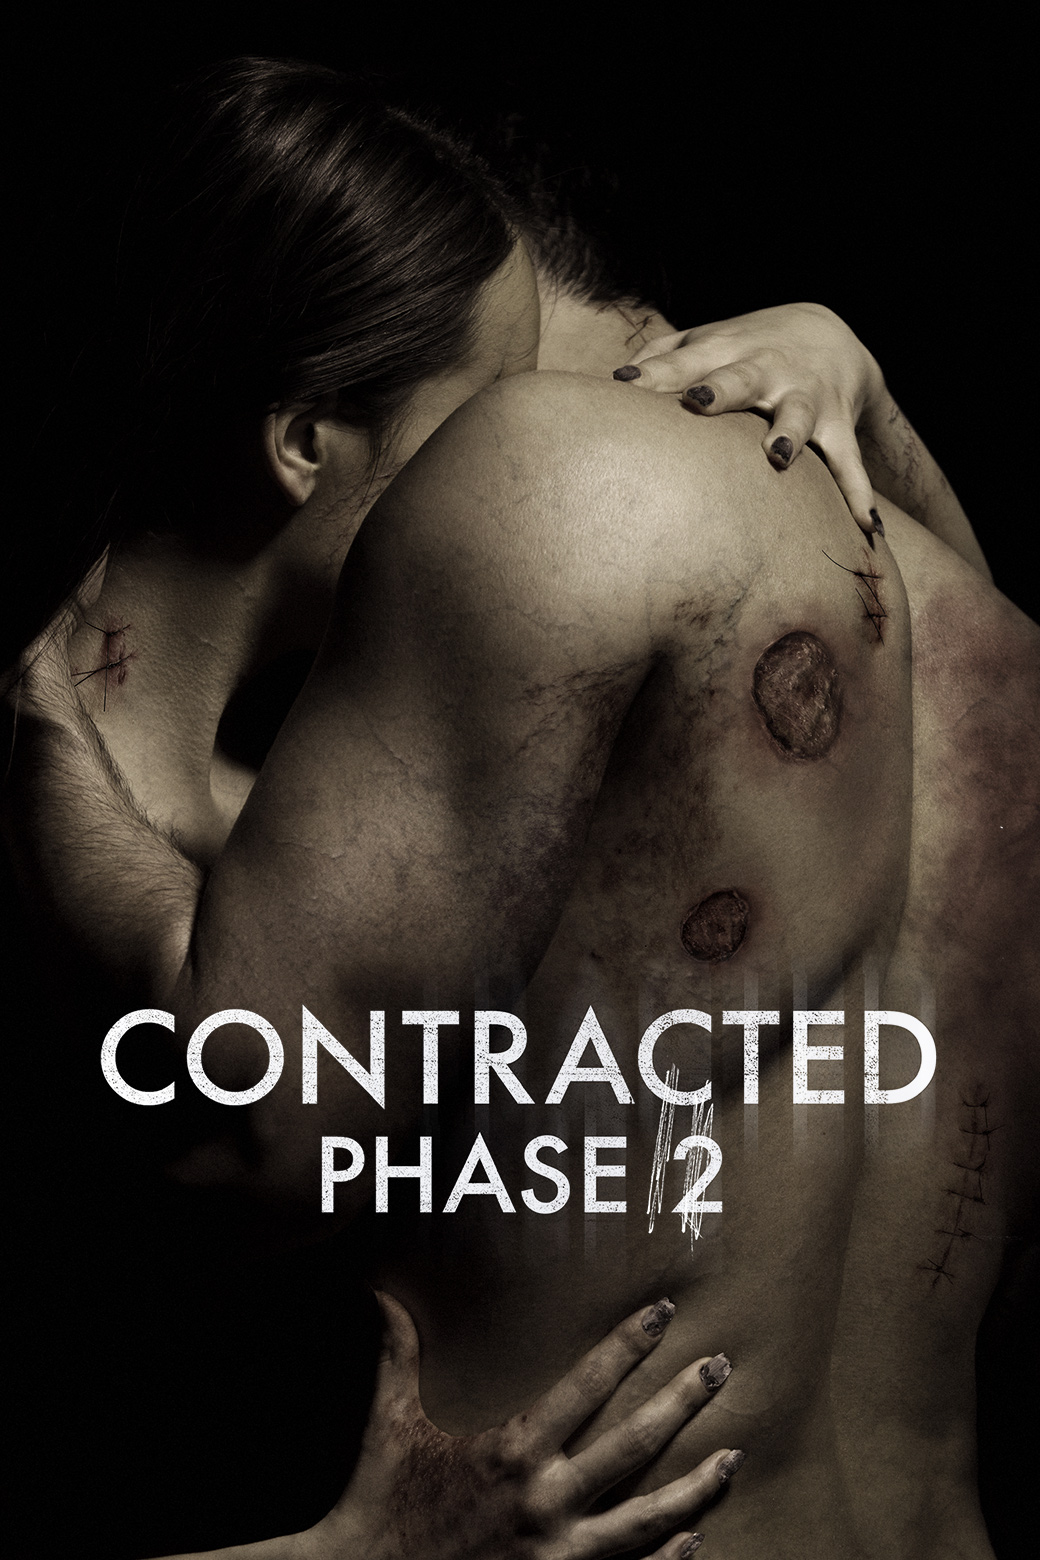 Contracted: Phase 2